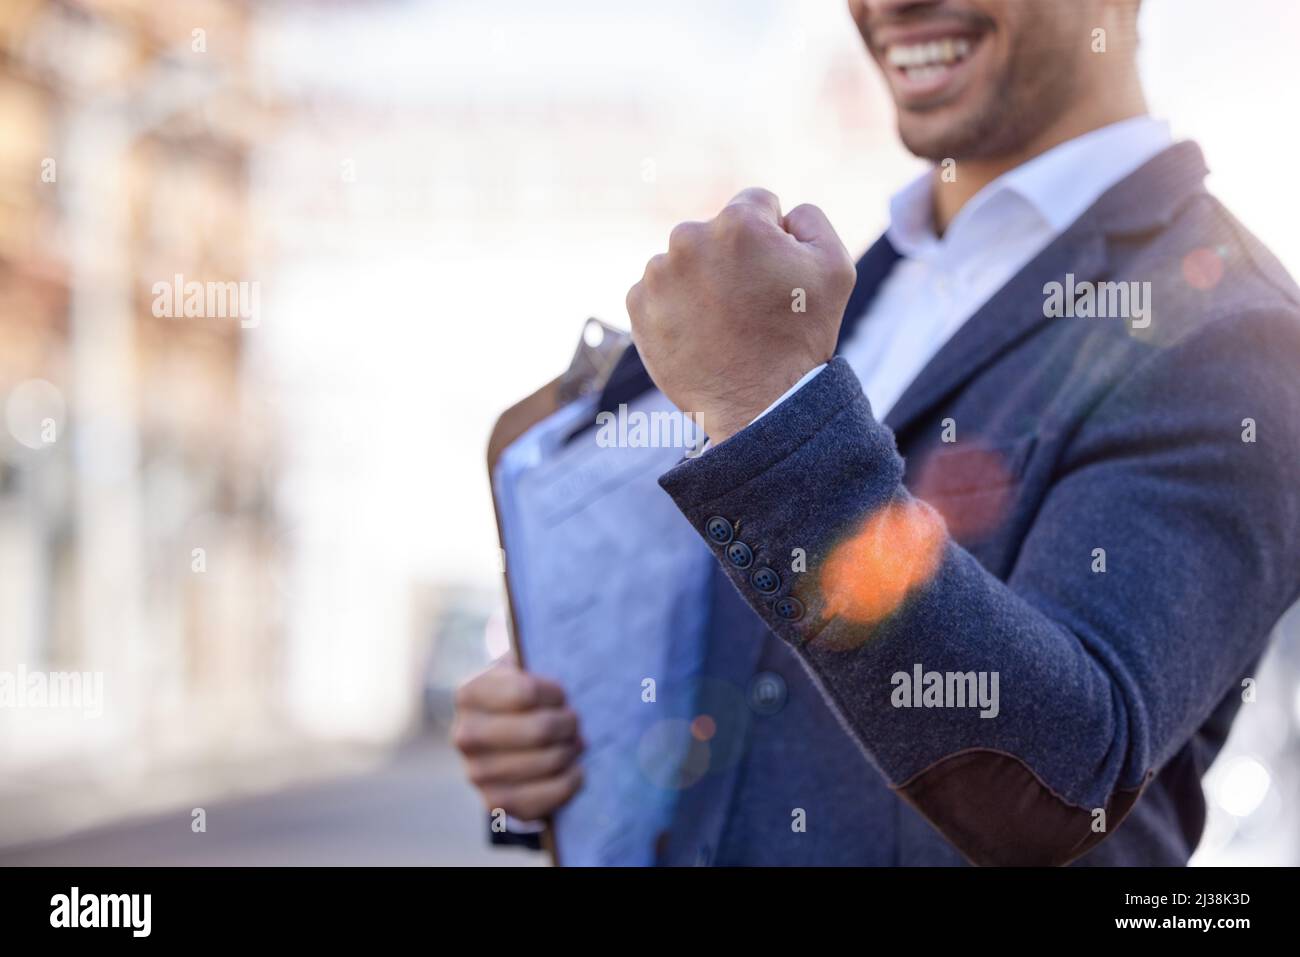 Celebrating my career success. Shot of a businessman cheering in excitement while holding a clipboard. Stock Photo